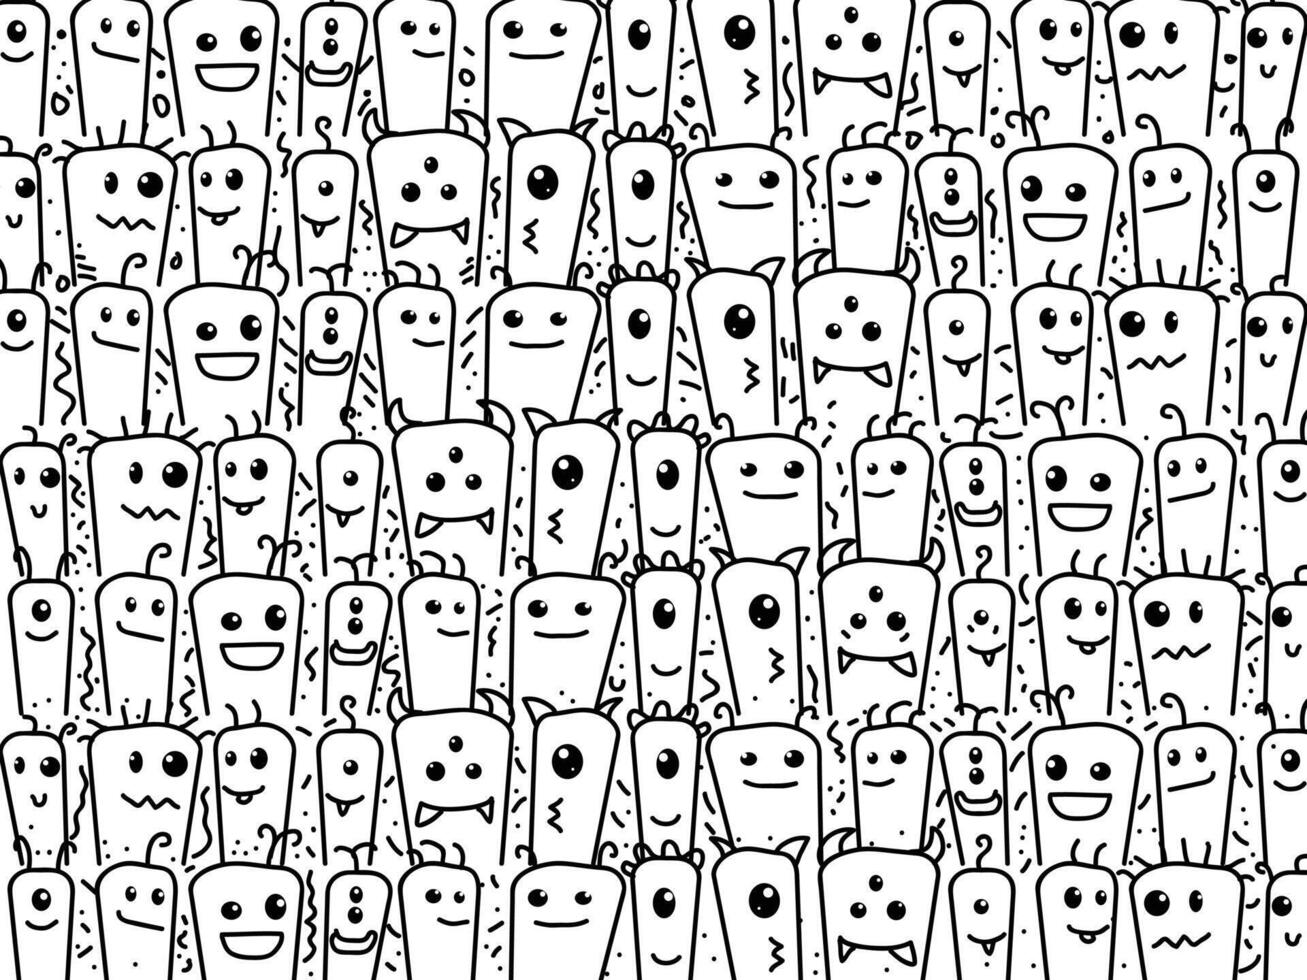 Cute and Adorable Doodle Art Monster, Black and White Doodle Pattern Background Suitable for Decoration vector